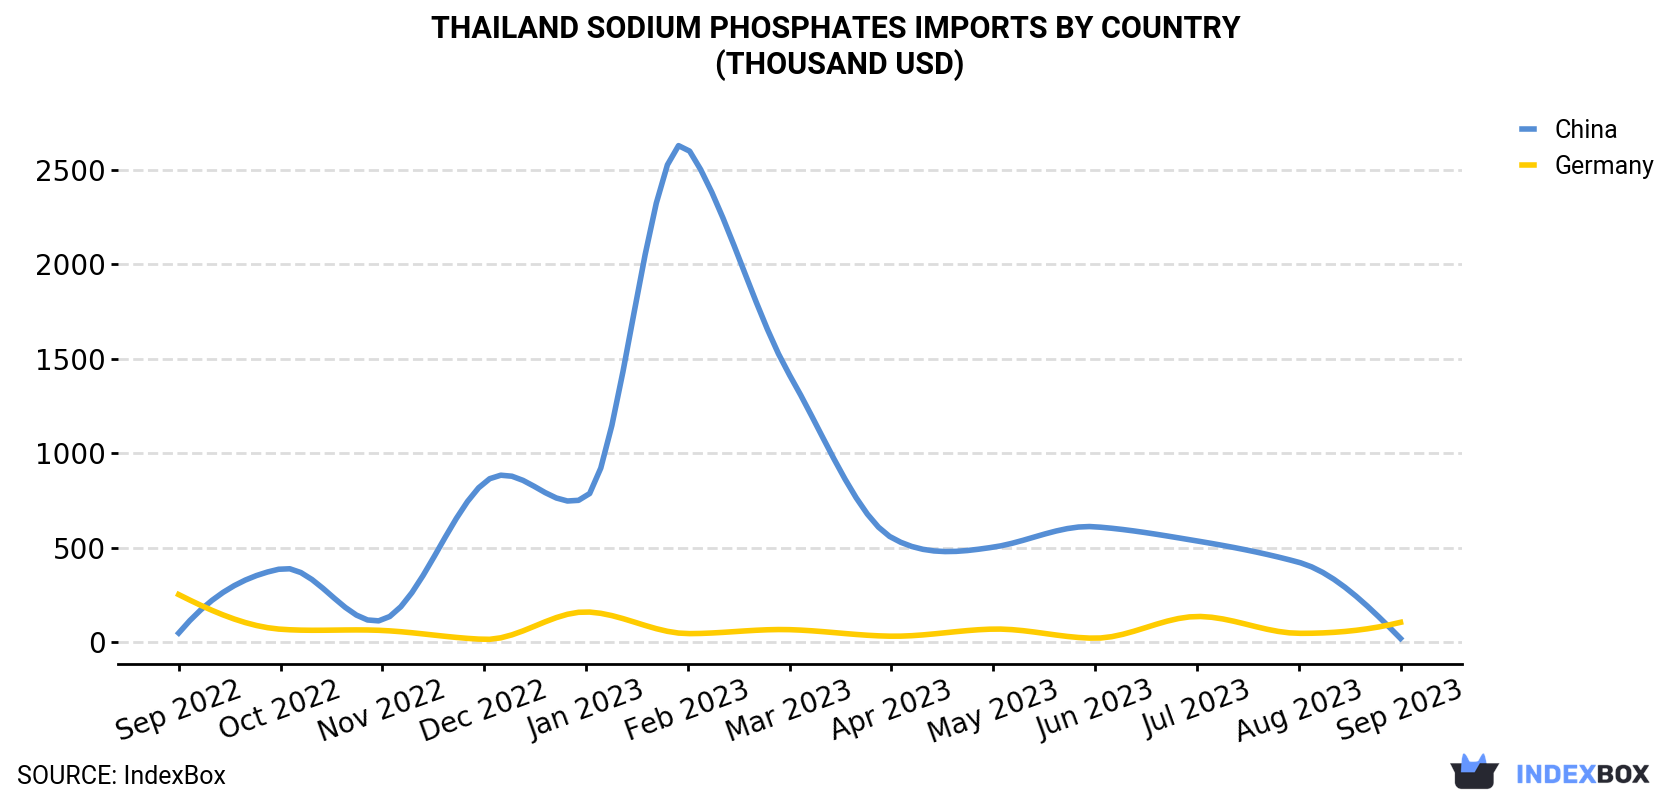 Thailand Sodium Phosphates Imports By Country (Thousand USD)